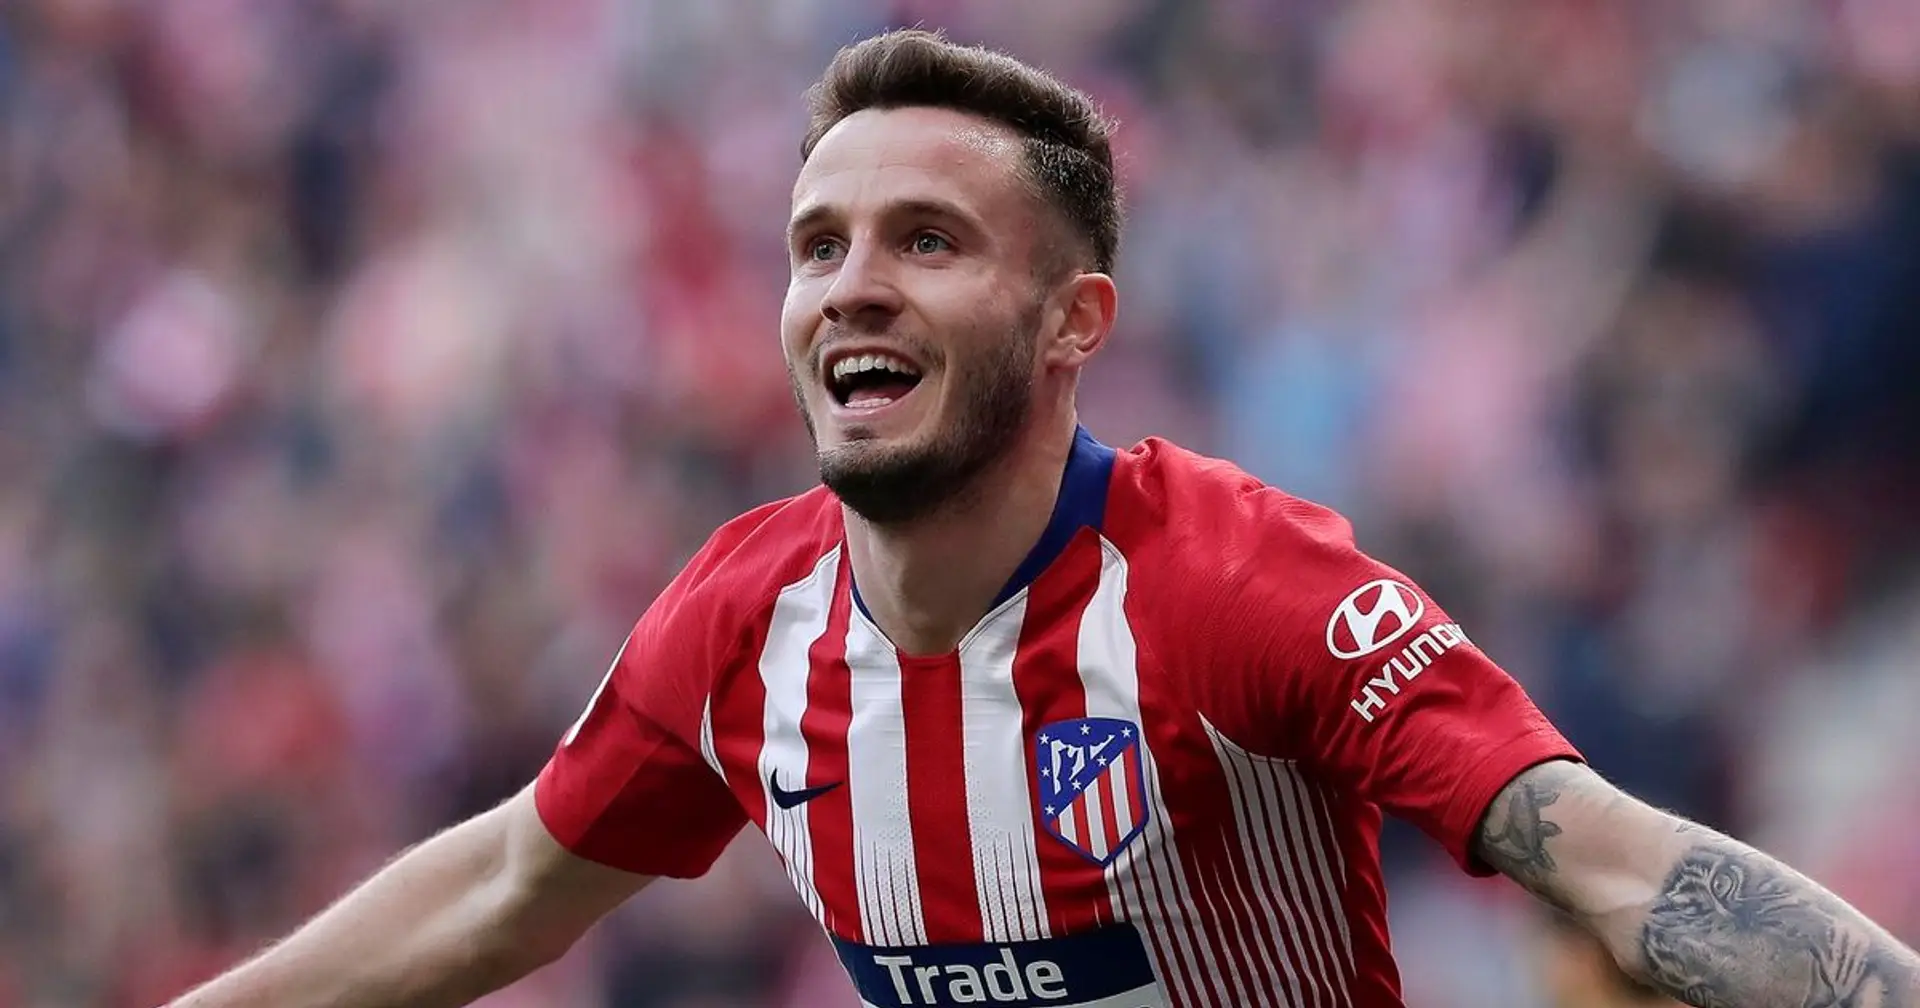 Man United consider Saul Niguez 'one of the biggest opportunities on the market' (reliability: 5 stars)